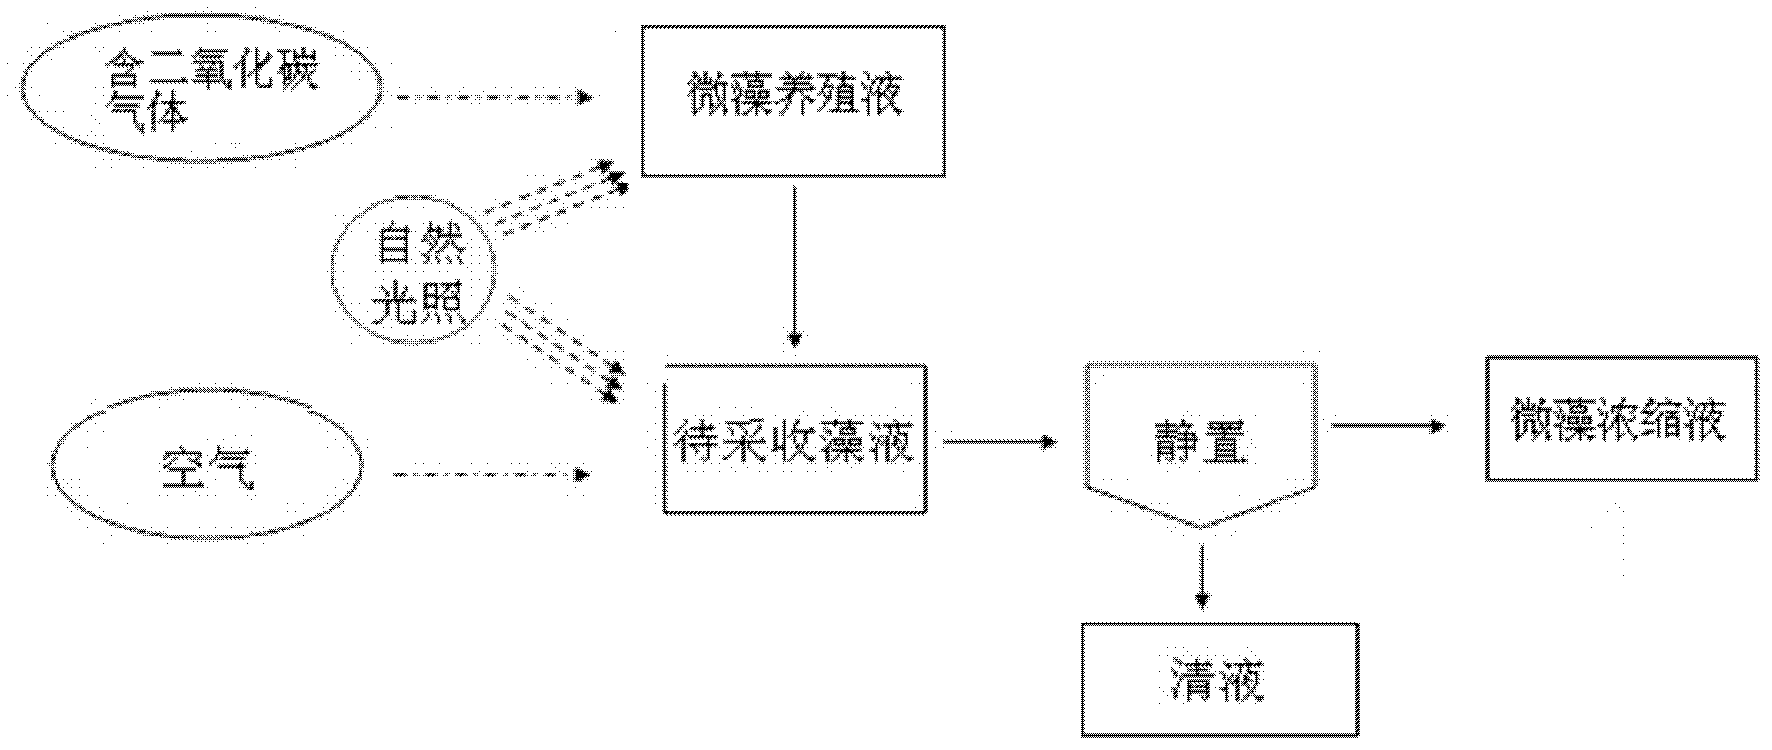 Microalgae collection method and application